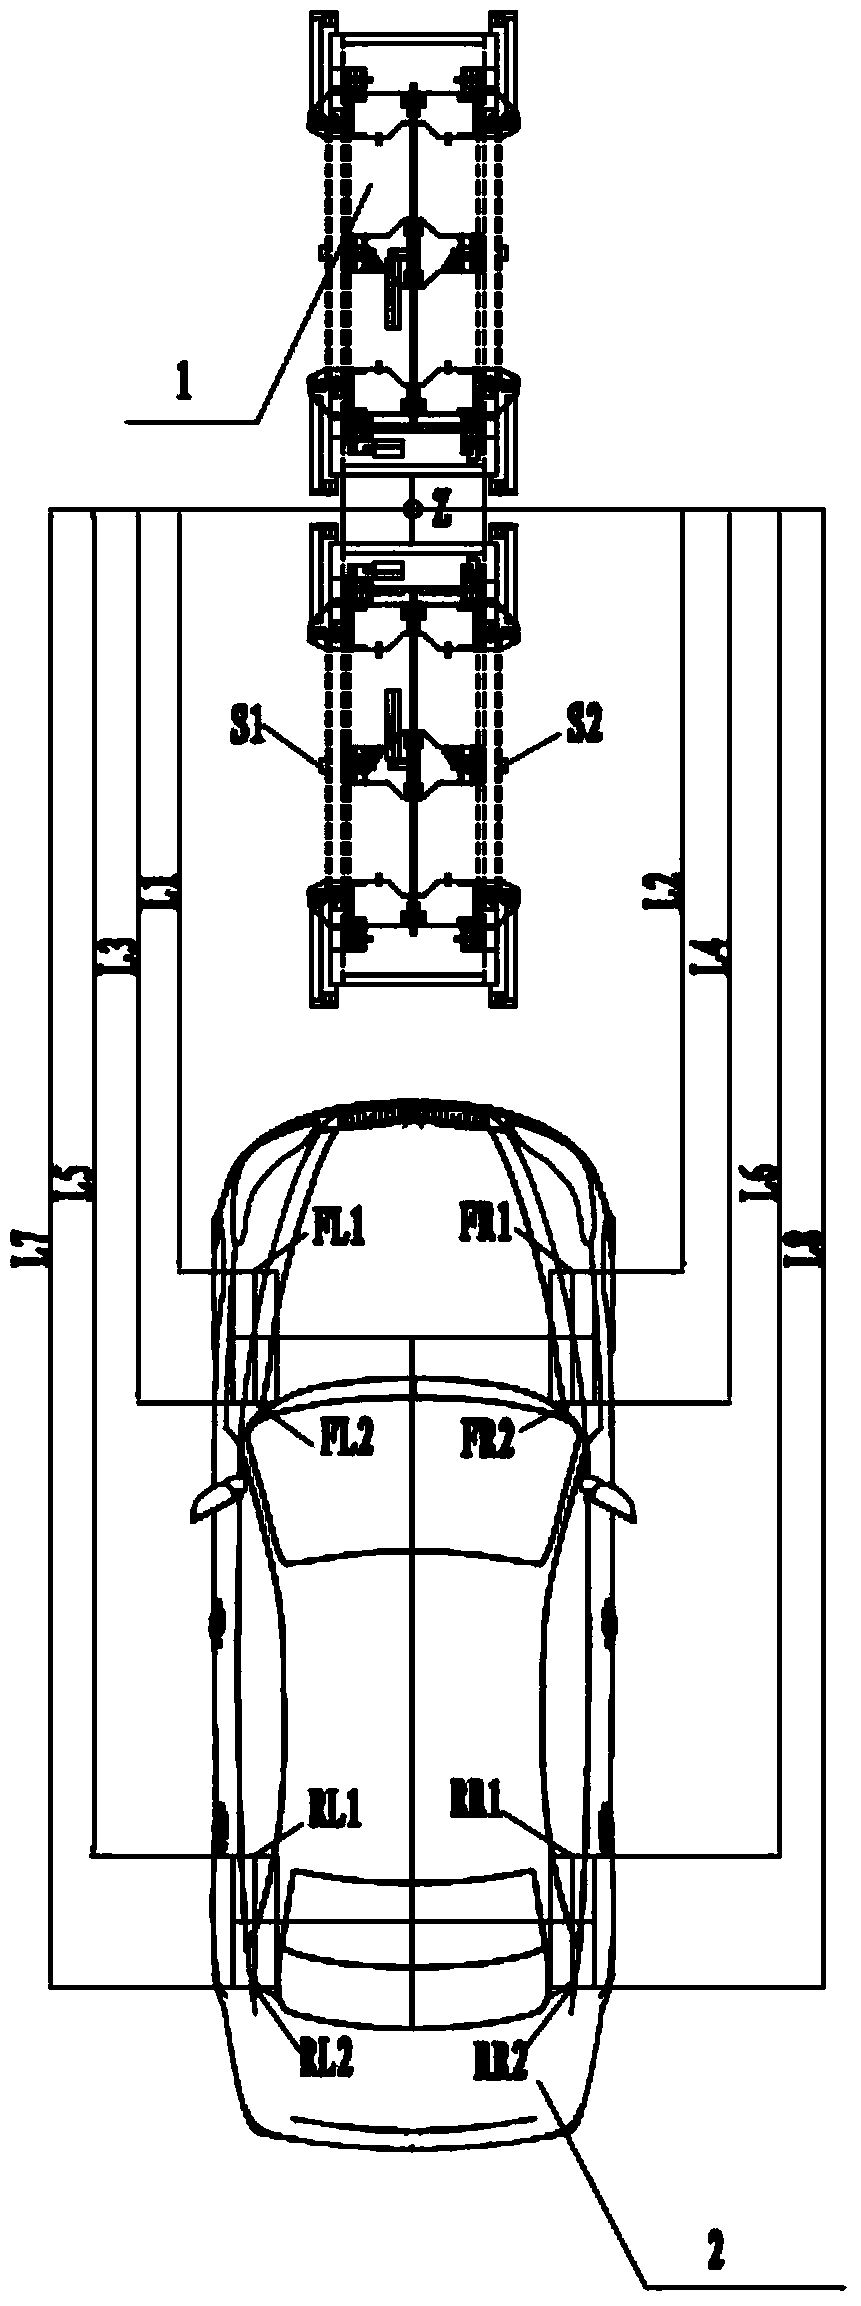 Device and method for measuring wheel base under vehicle stationary state